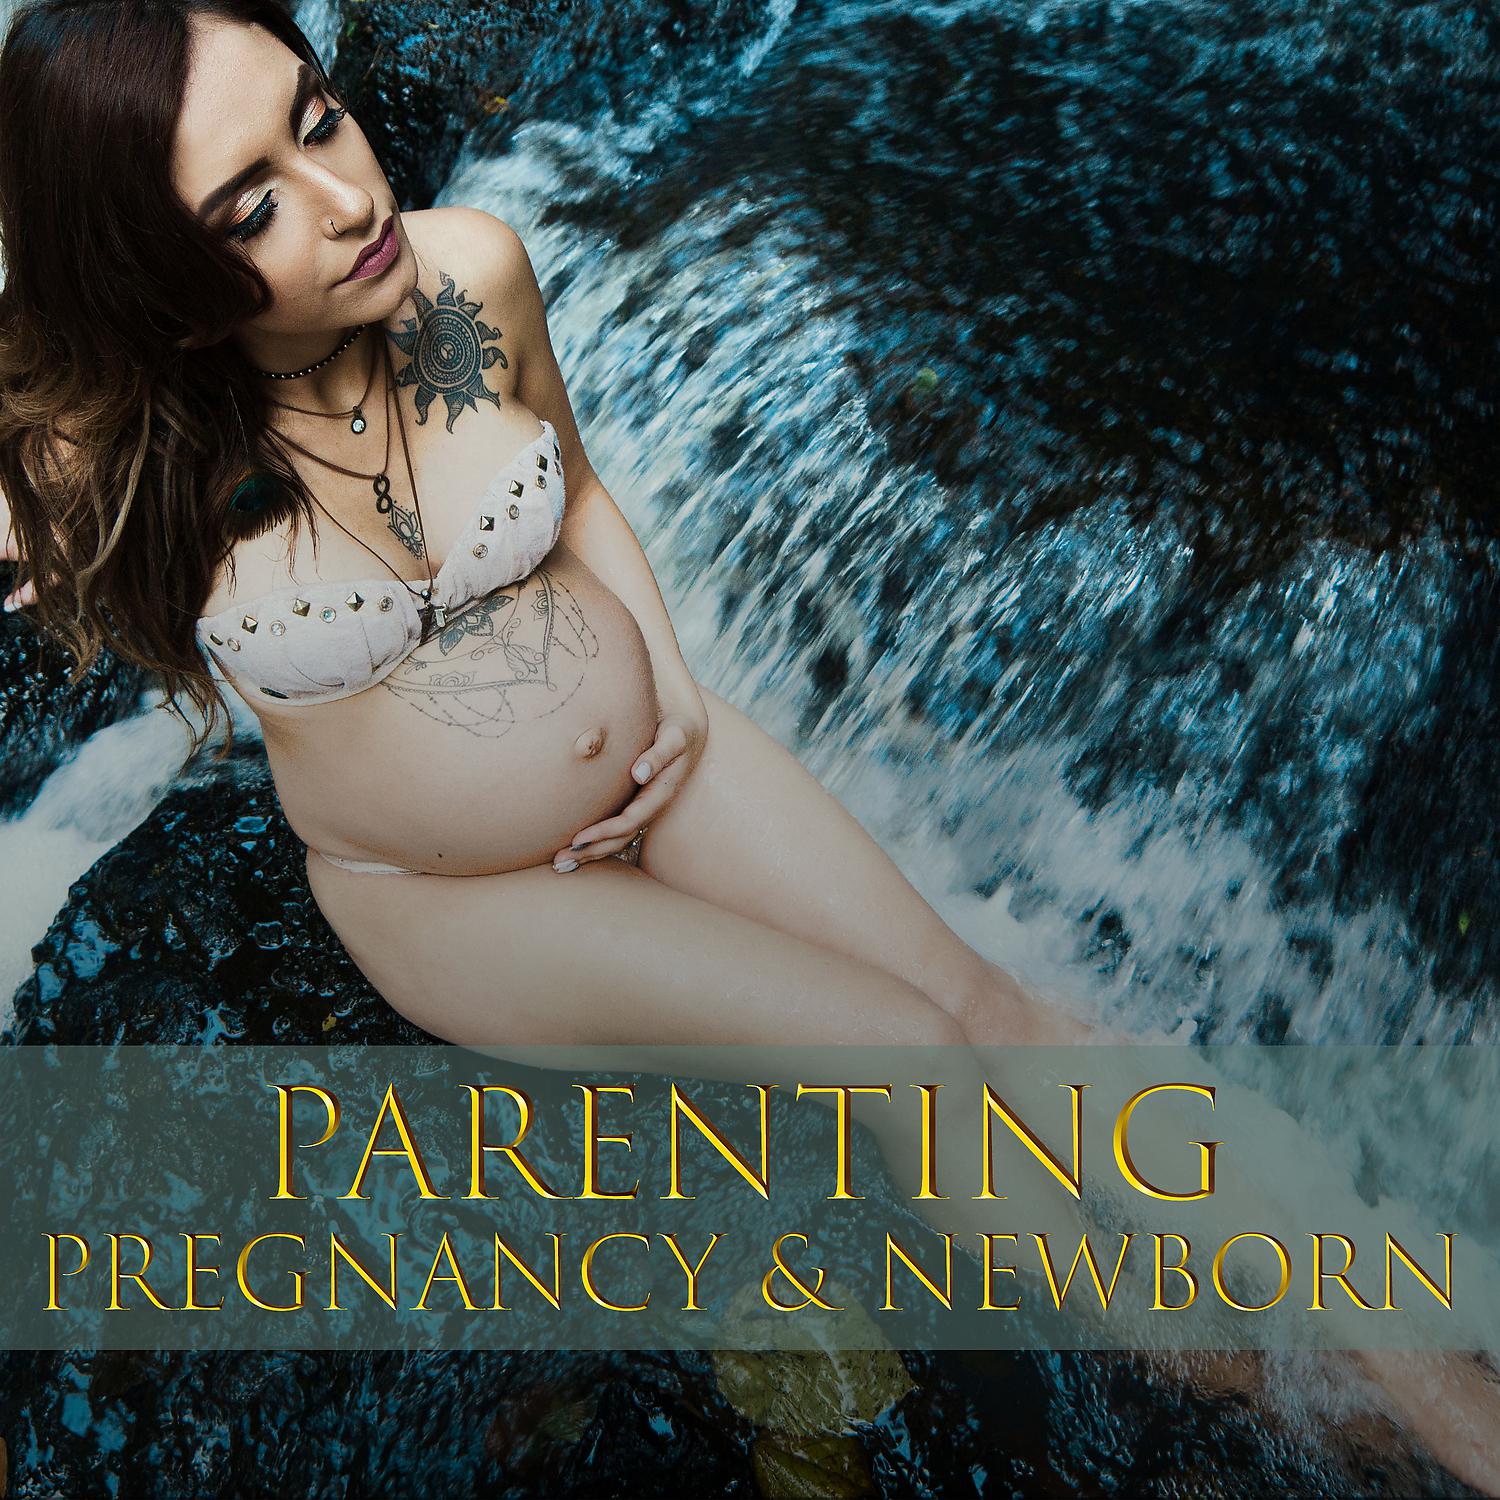 Постер альбома Parenting, Pregnancy & Newborn: New Age Music for Labor, Delivery, Calm Nature for Relaxation, Meditation, Prenatal Yoga, Happy Blissful Maternity, Infant Sleep & Baby Care